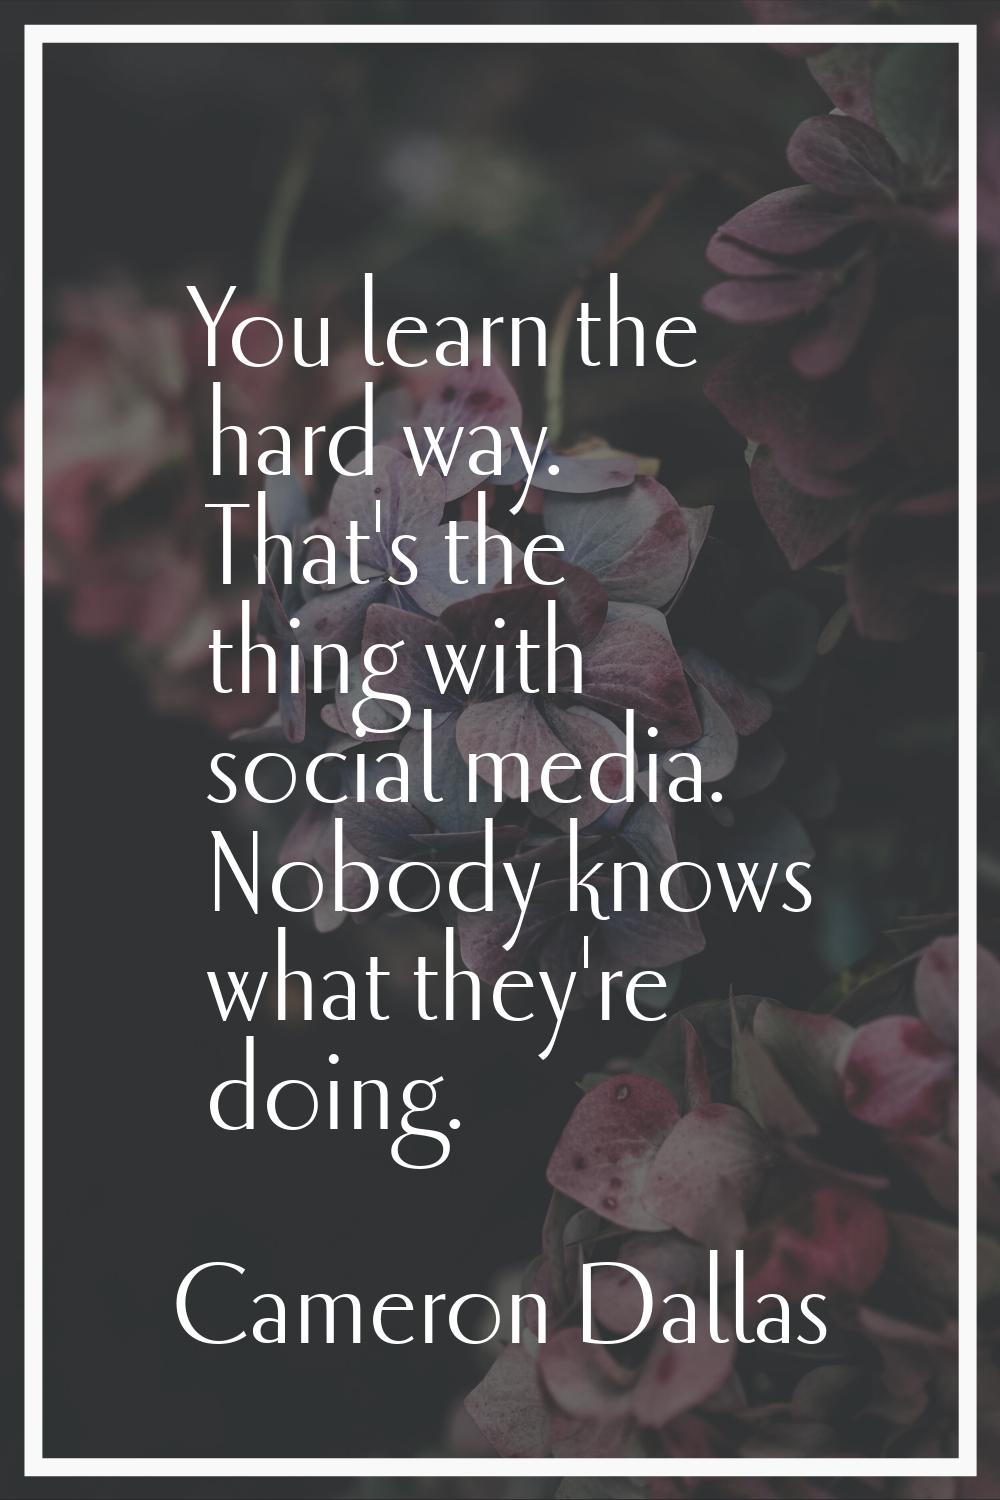 You learn the hard way. That's the thing with social media. Nobody knows what they're doing.